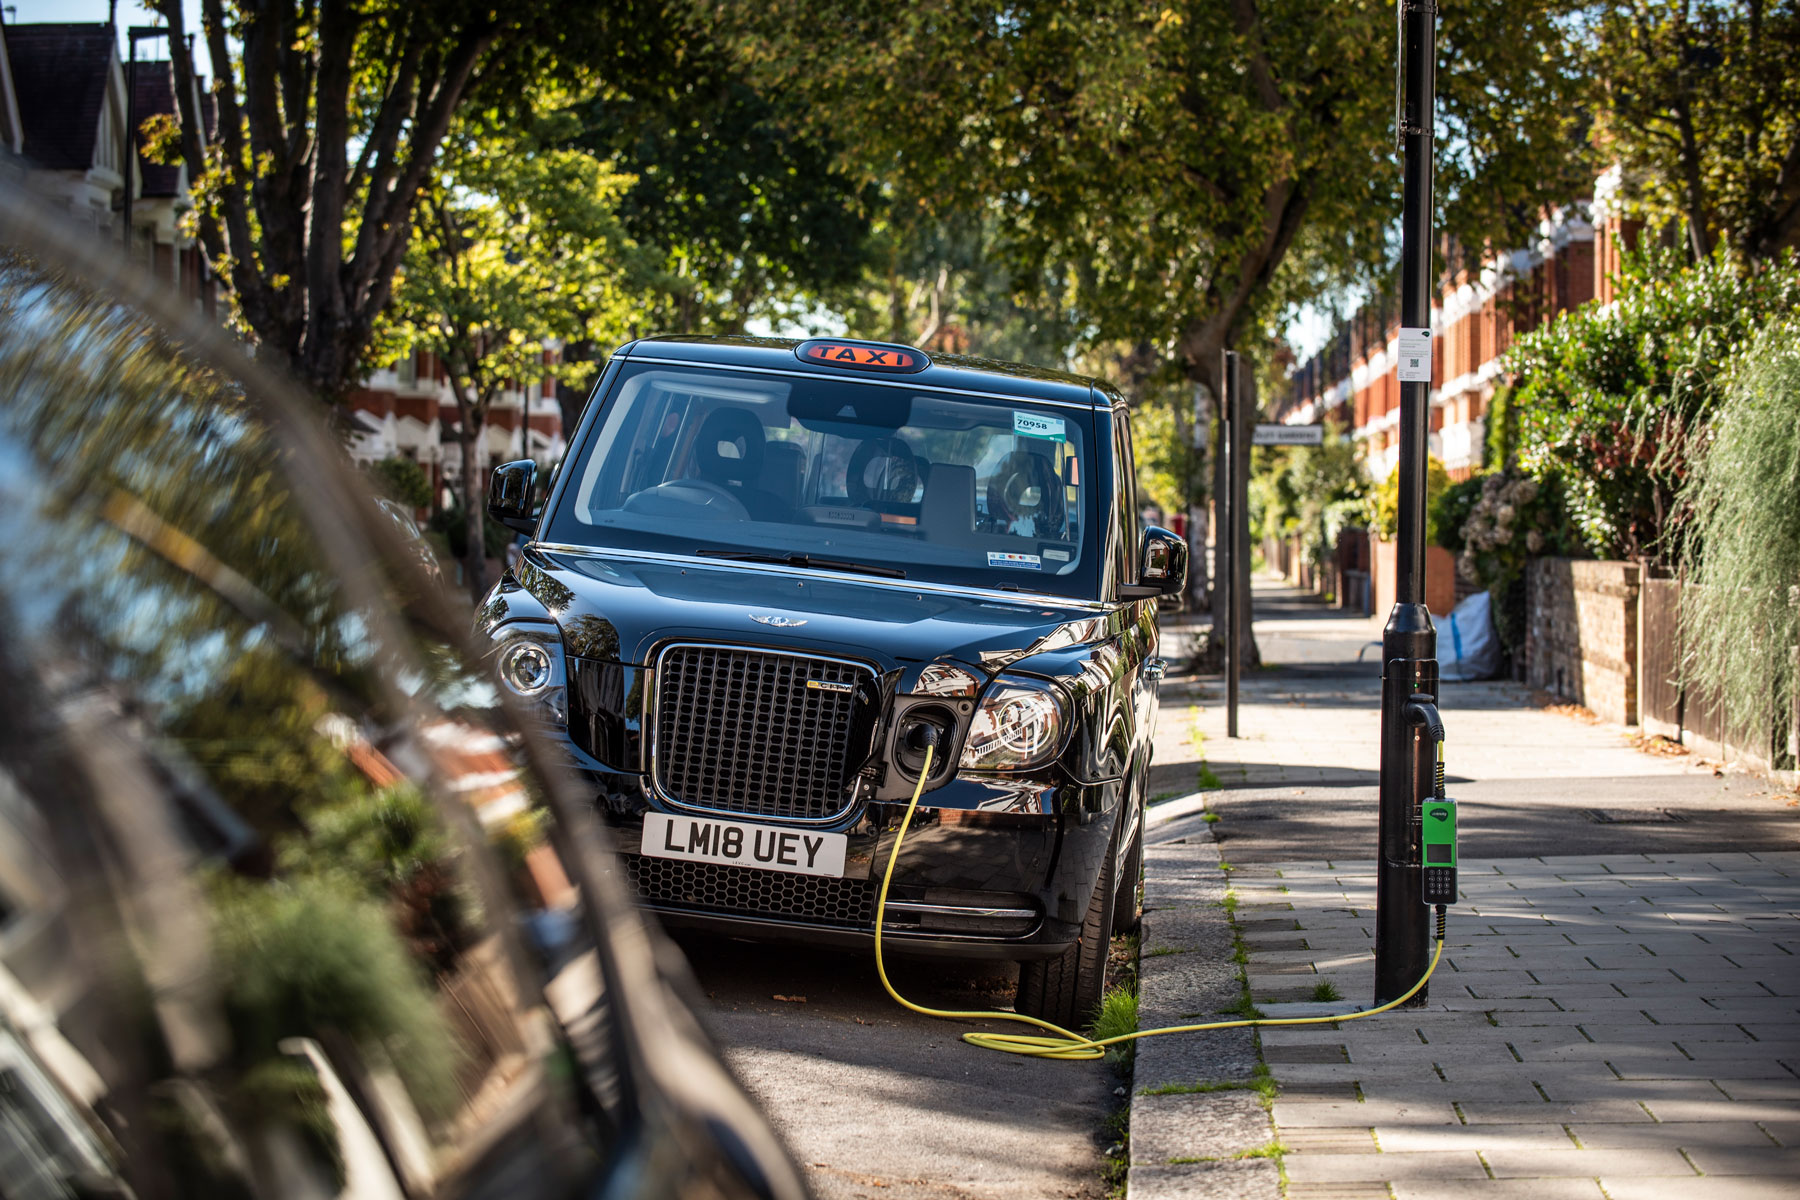 London campaign for Ubitricity, charging points for electric mobility,